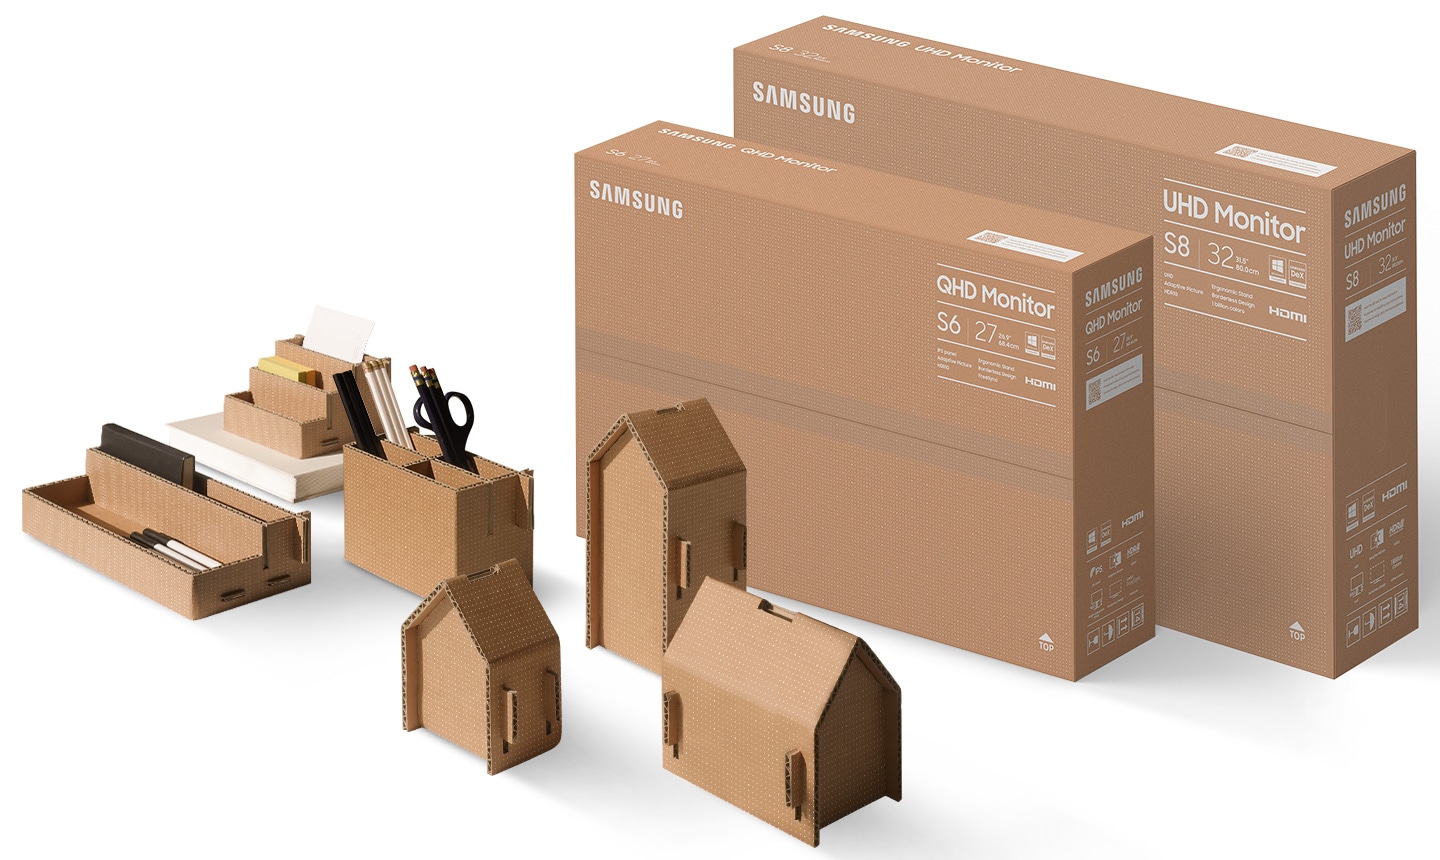 There are S8 32' and S6 27' packing boxes, and in front of them are boxed pencil holders, organizers, and small items.